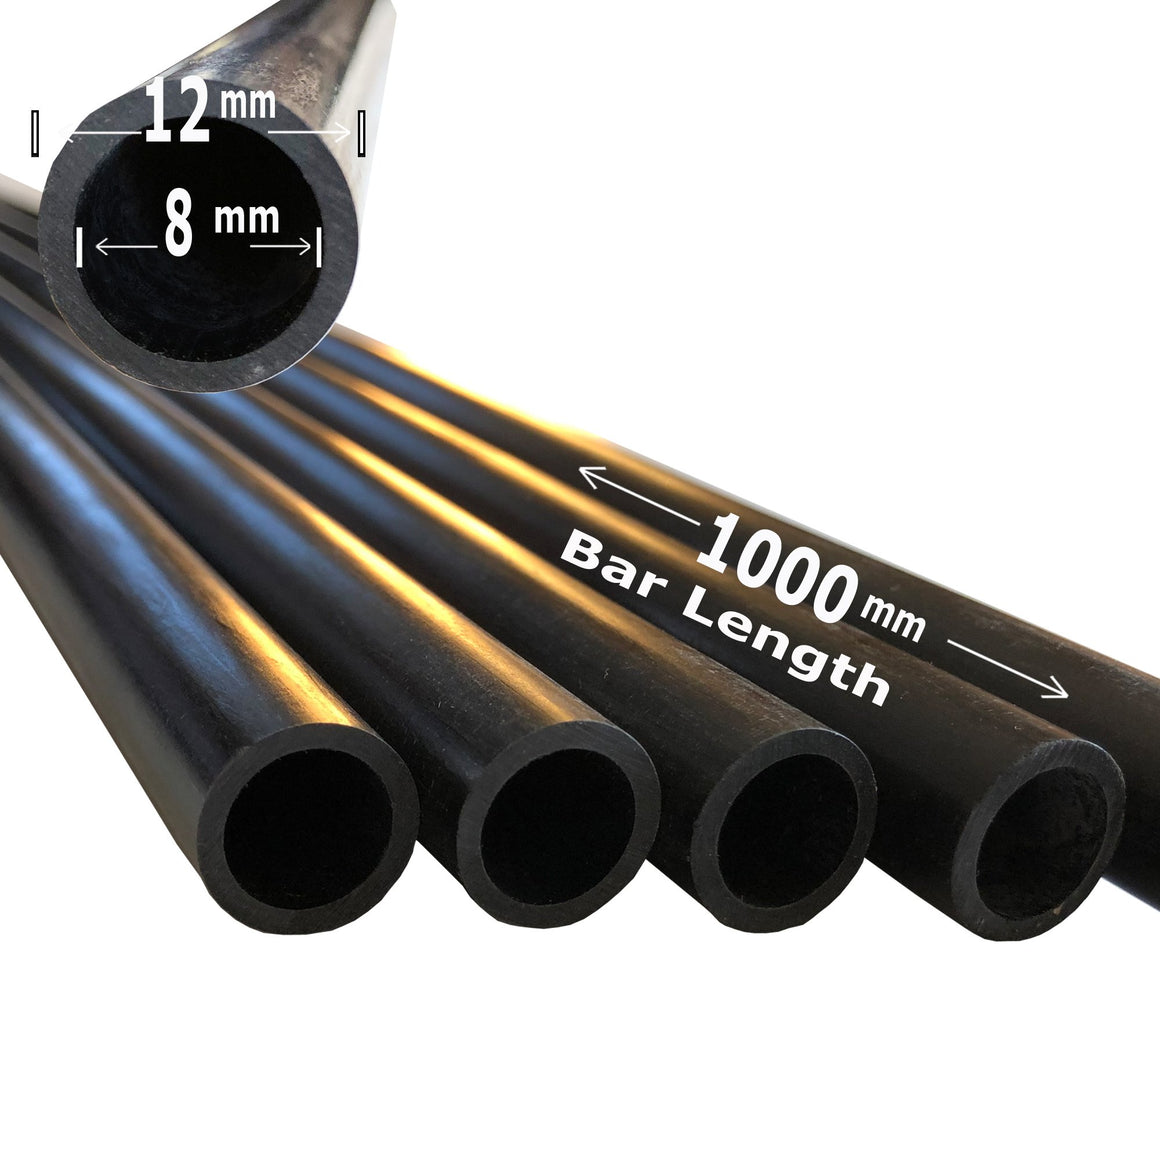 (4) Pieces - 12mm x 8mm x 1000mm Carbon Fiber Tube - Pultruded Round Tube. Super High Strength for RC Hobbies, Drones, Special Projects